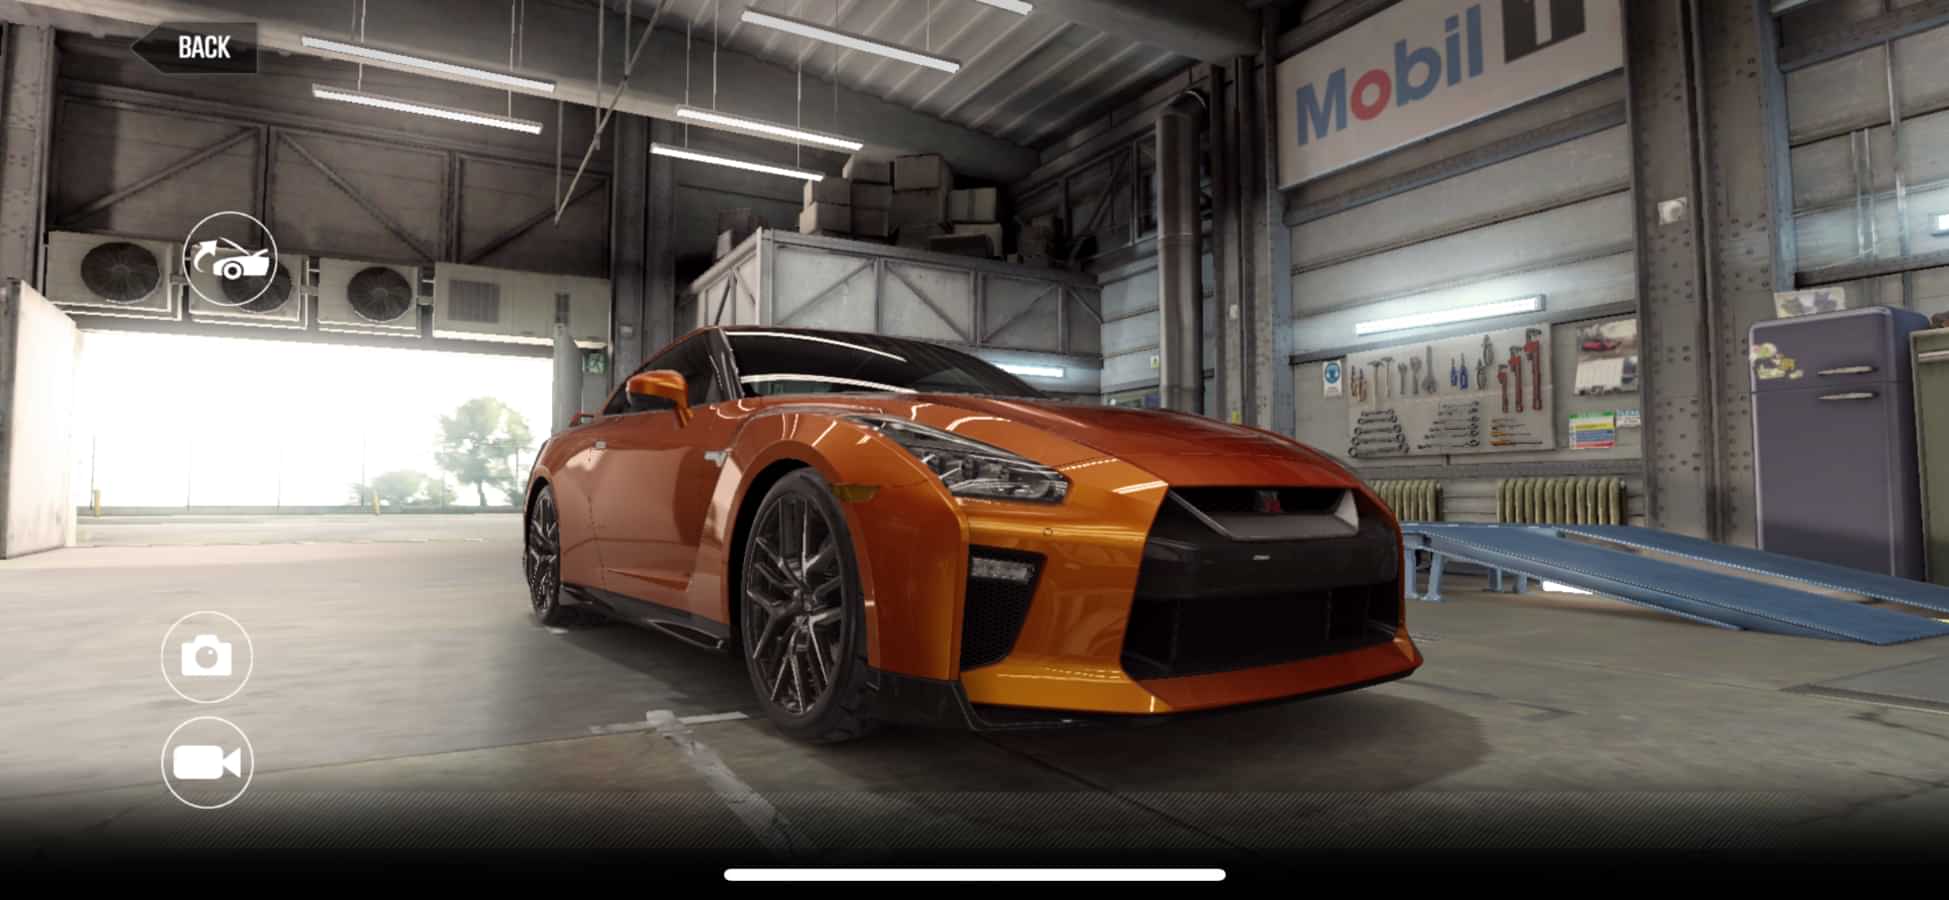 17 Nissan Gt R Csr2 Tune And Shift Pattern